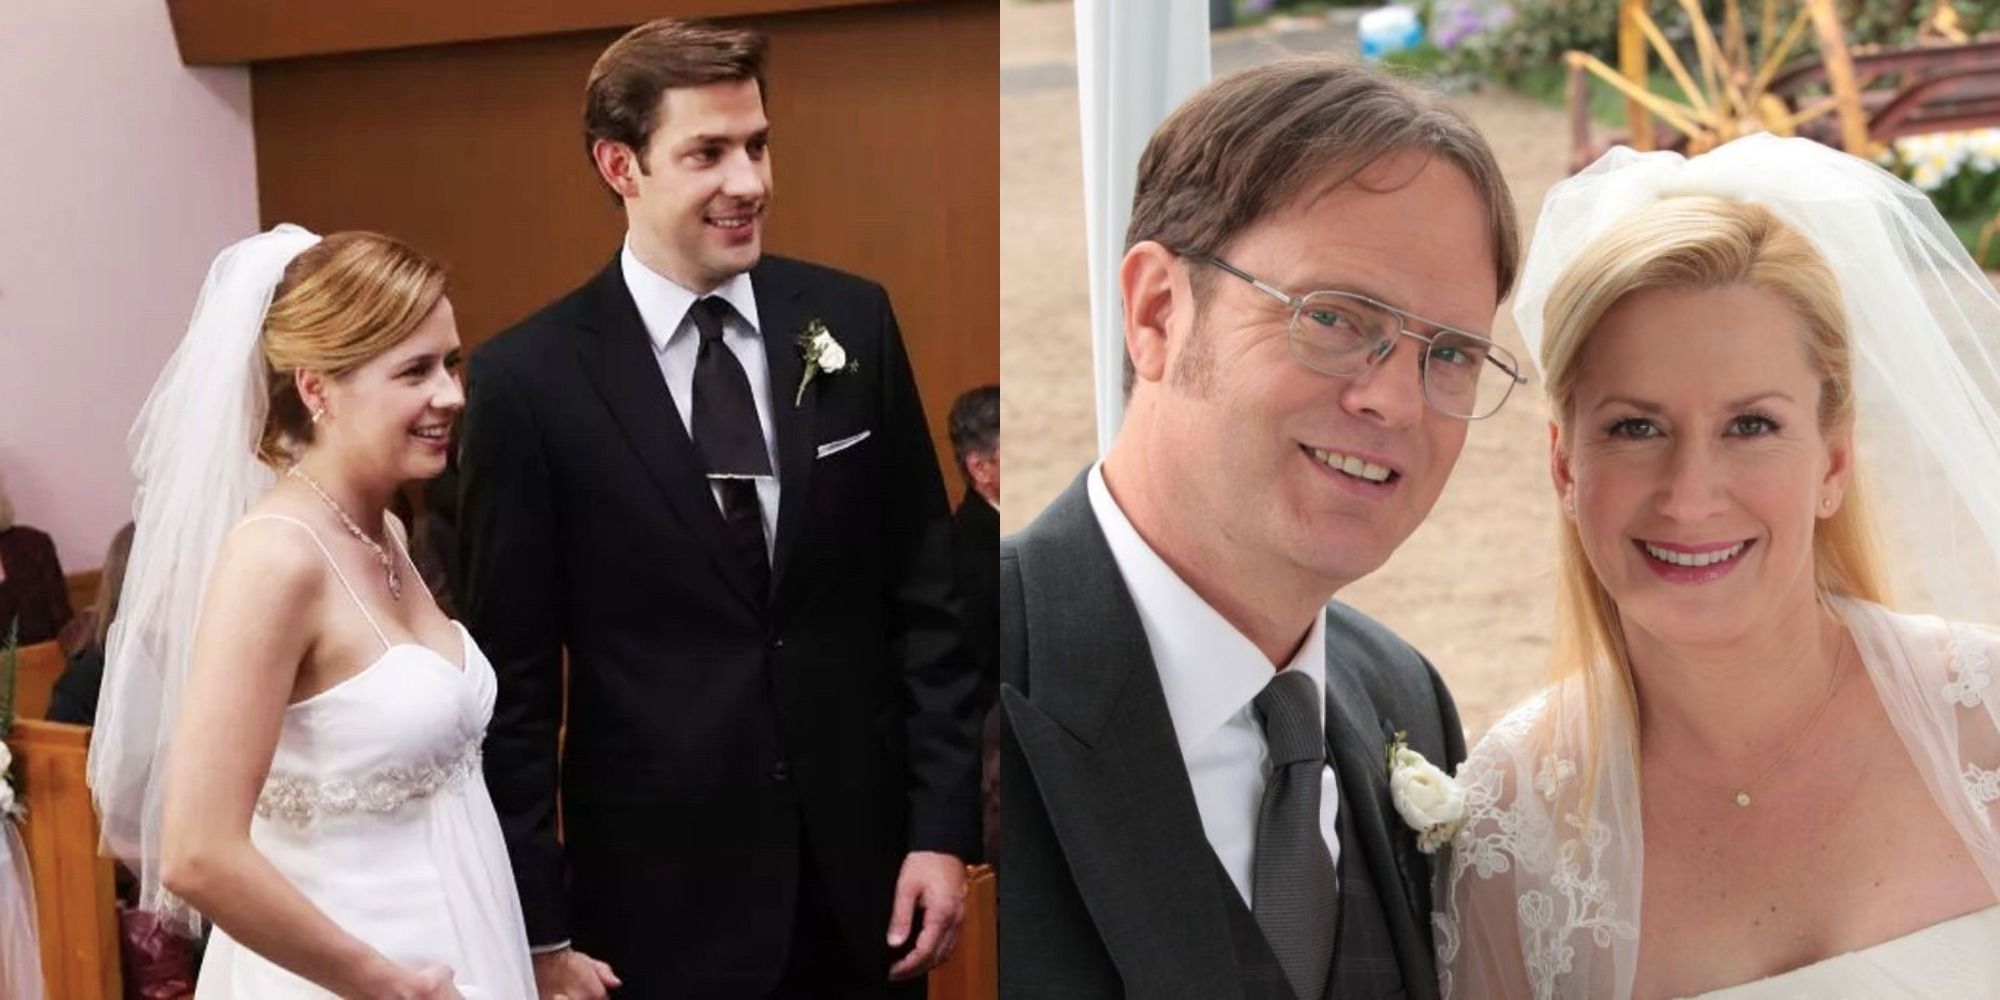 Split image showing the weddings of Pam and Jim, and Dwight and Angela in The Office